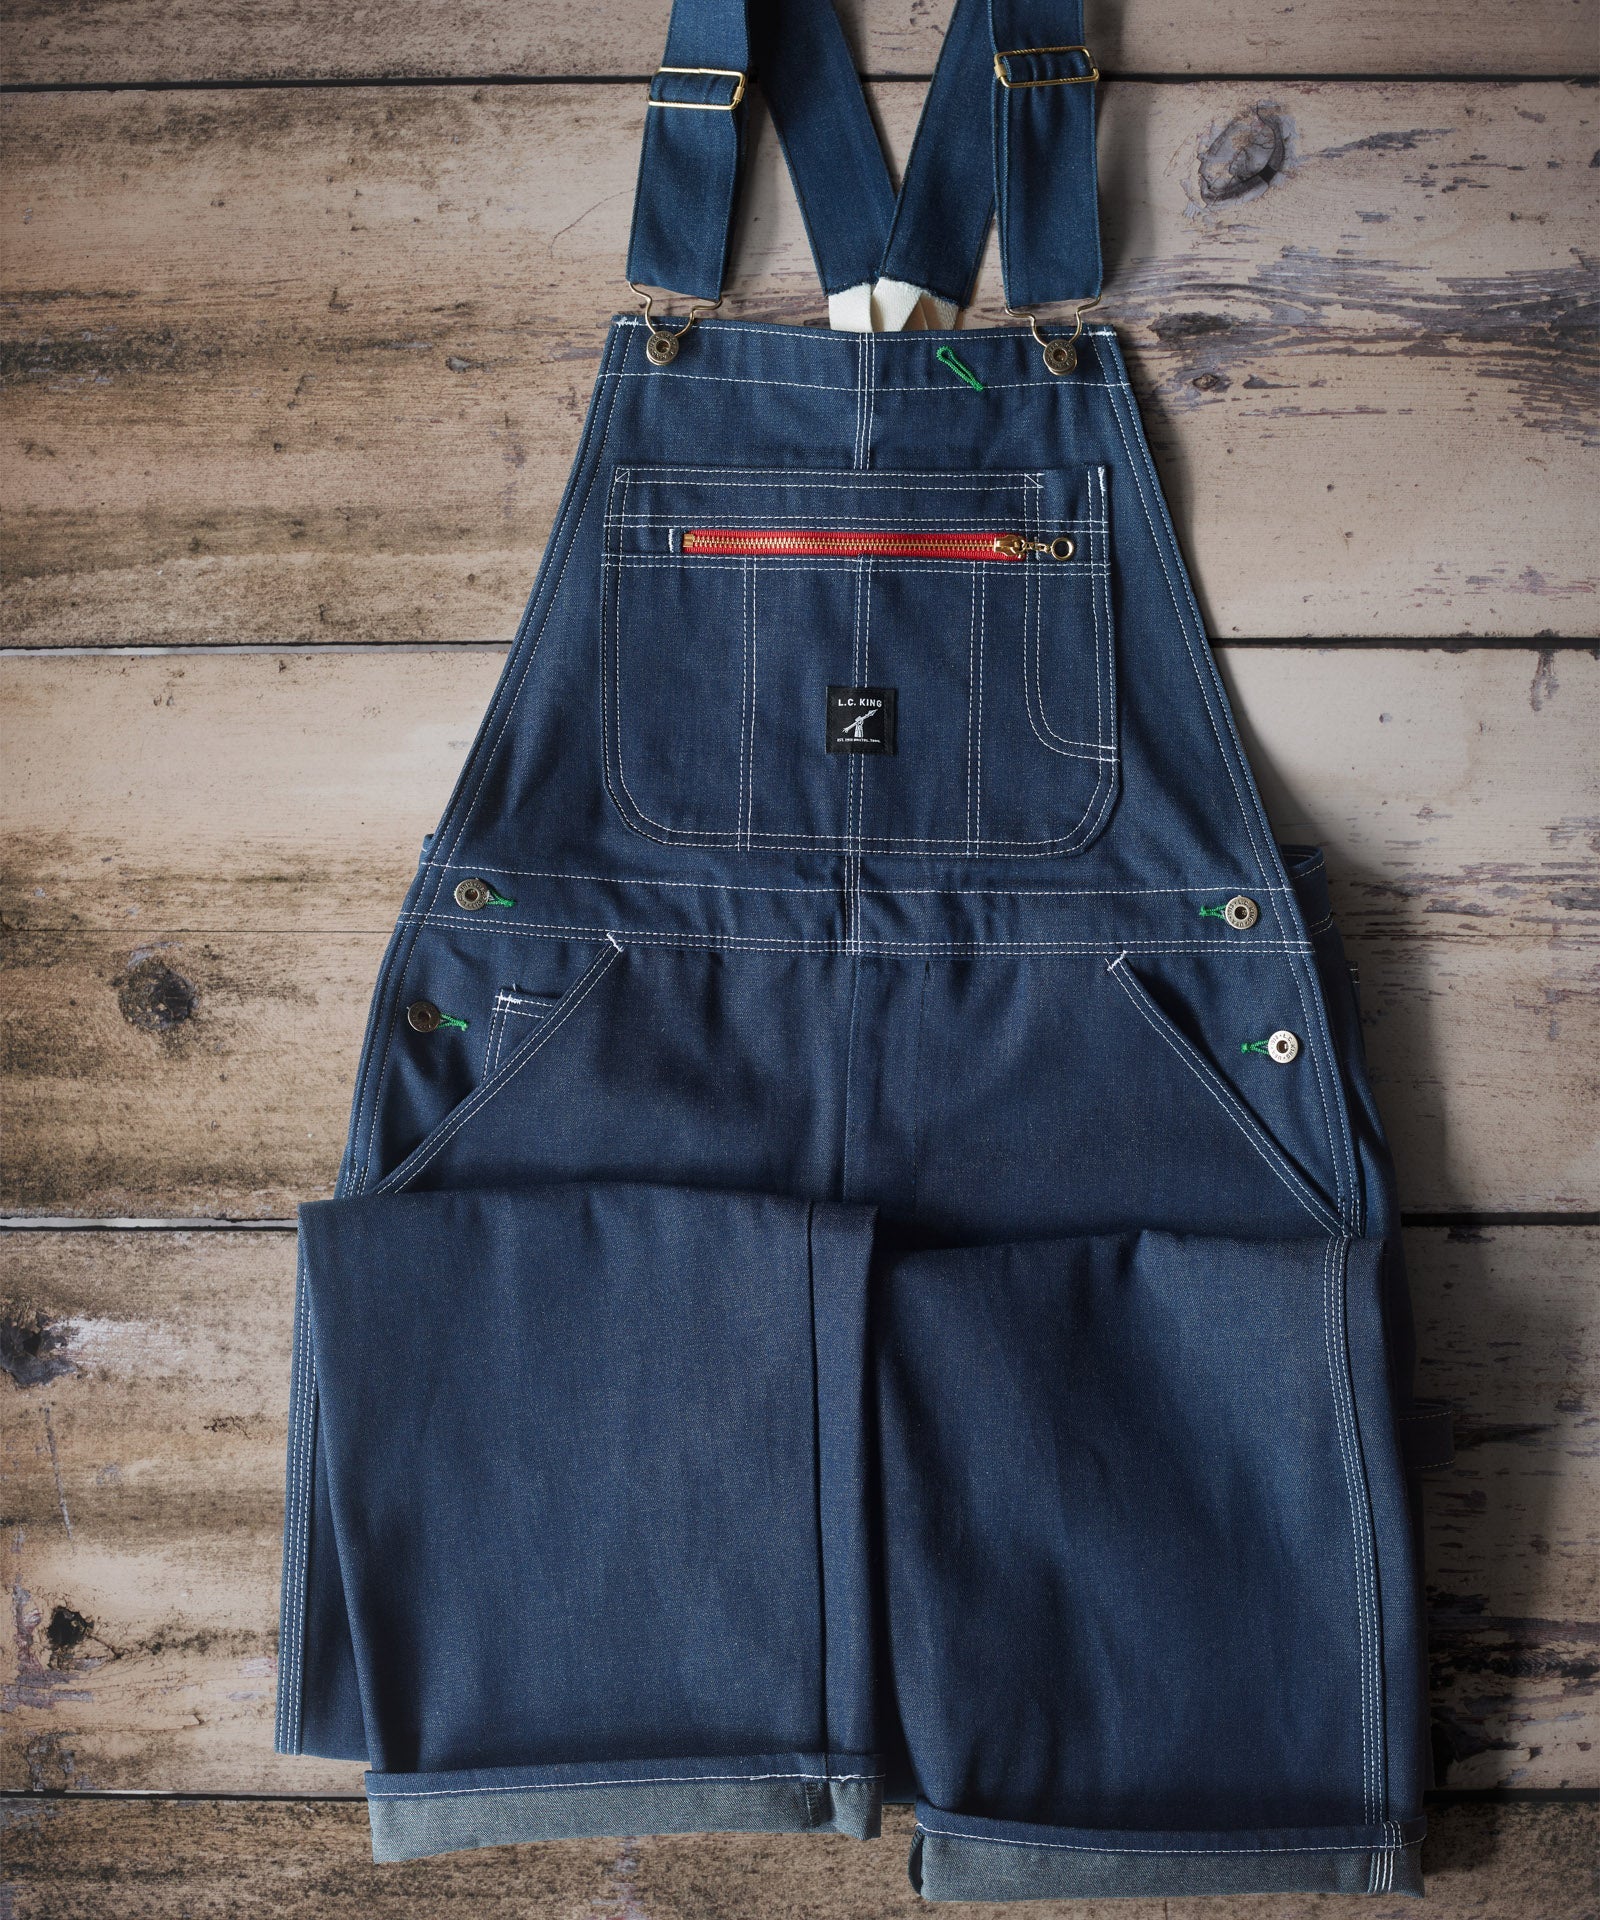 LC King Indigo Denim Low Back Overalls - 46 x 29 only